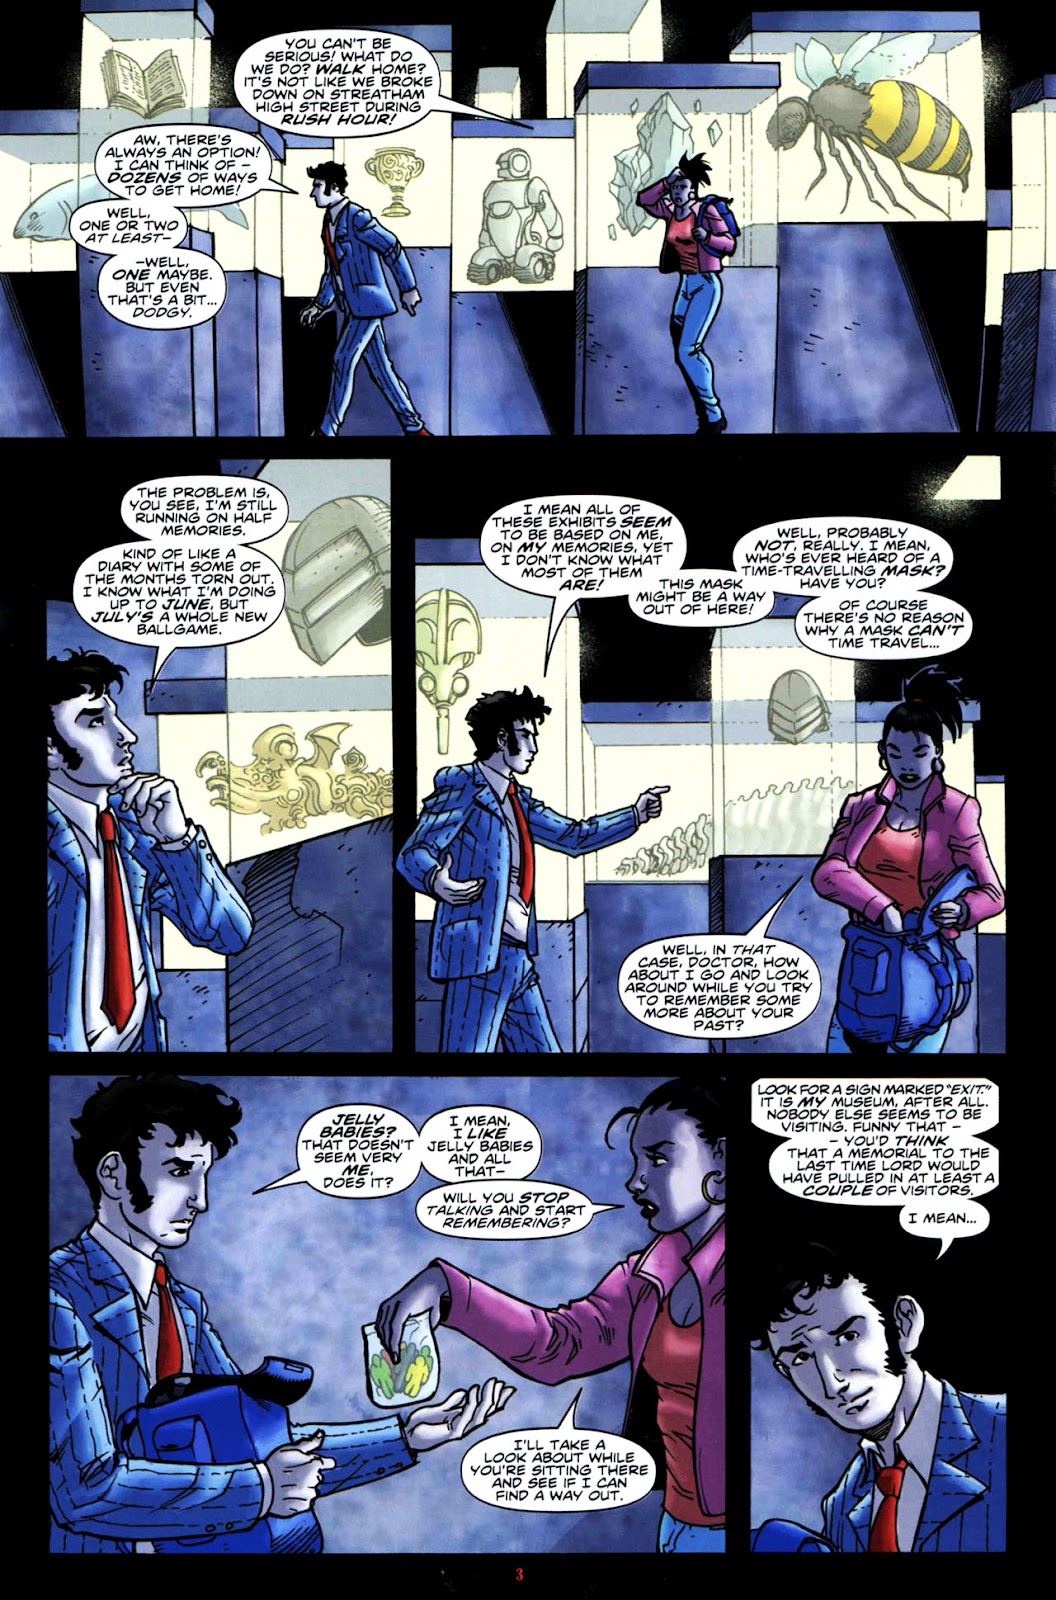 Doctor Who: The Forgotten issue 3 - Page 5